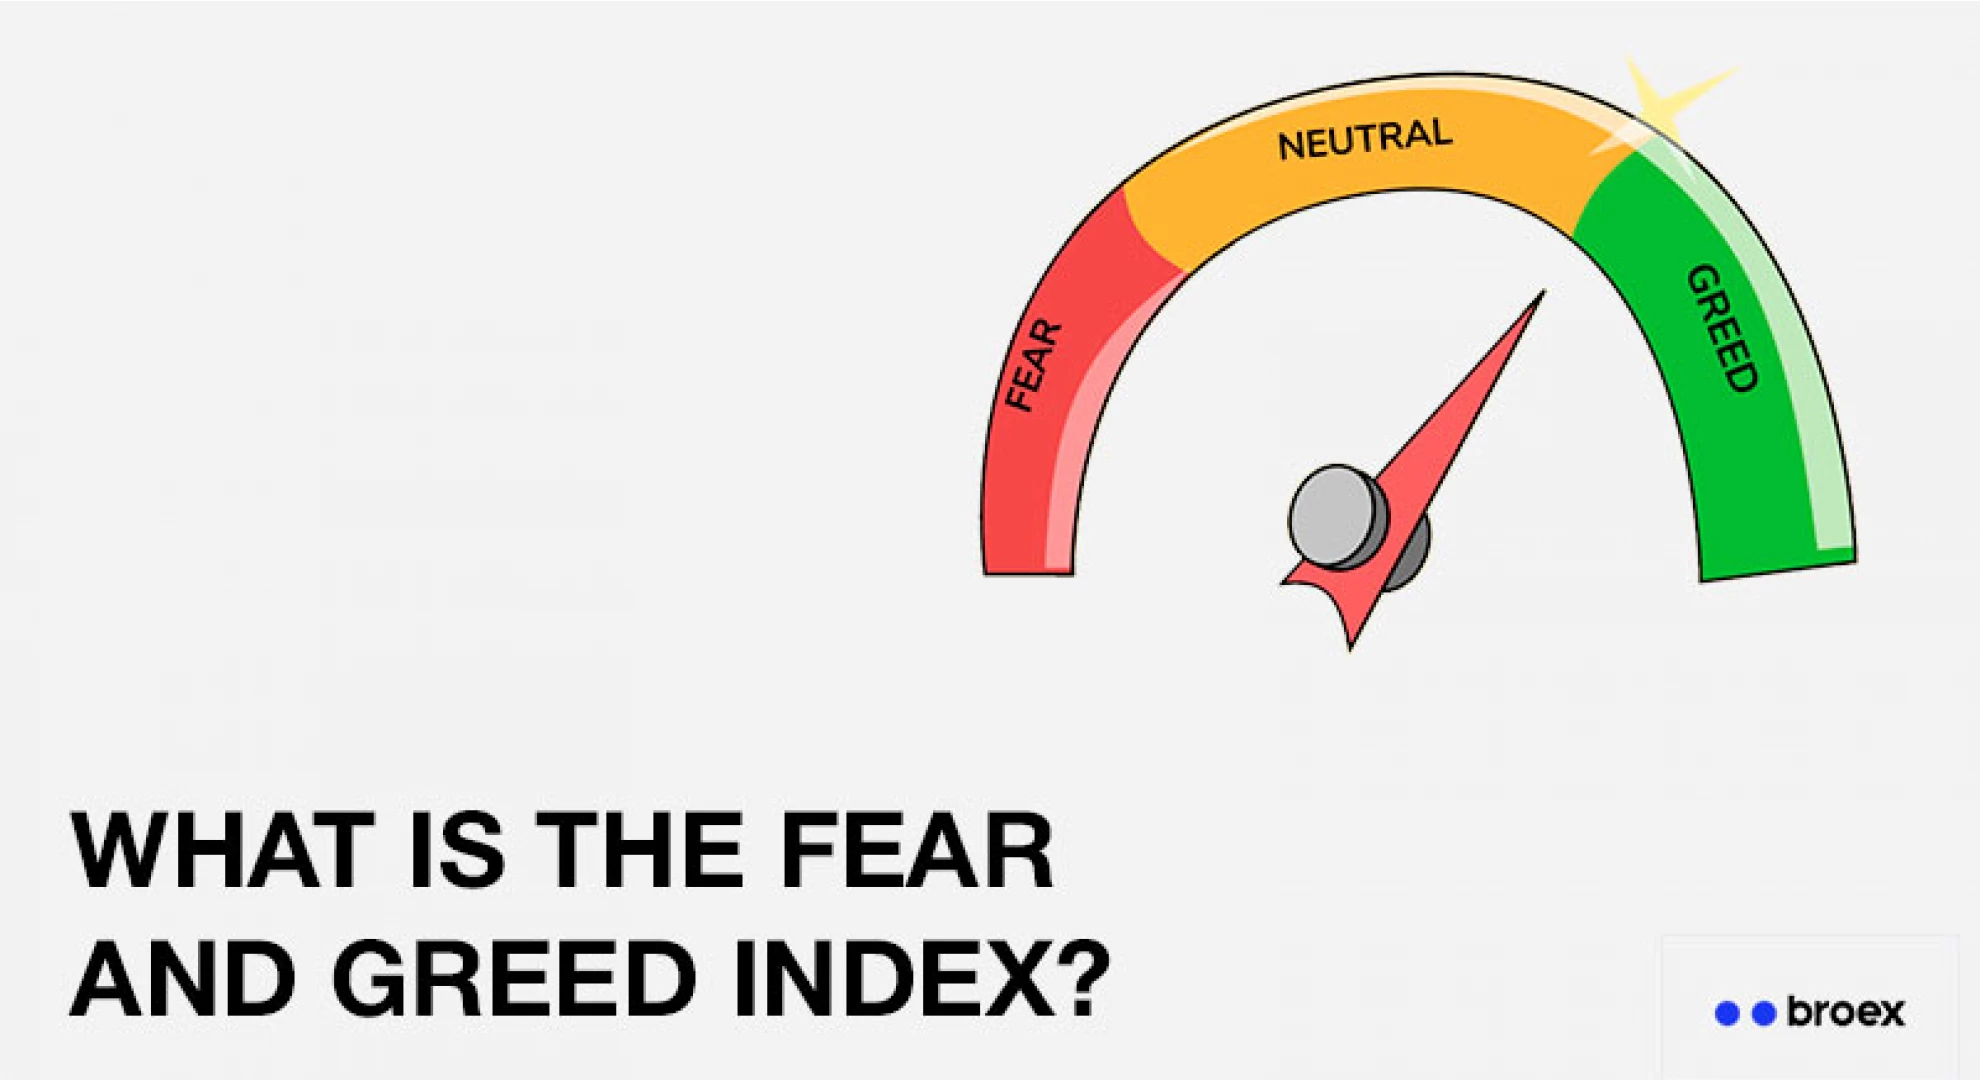 What is the Fear and Greed Index?